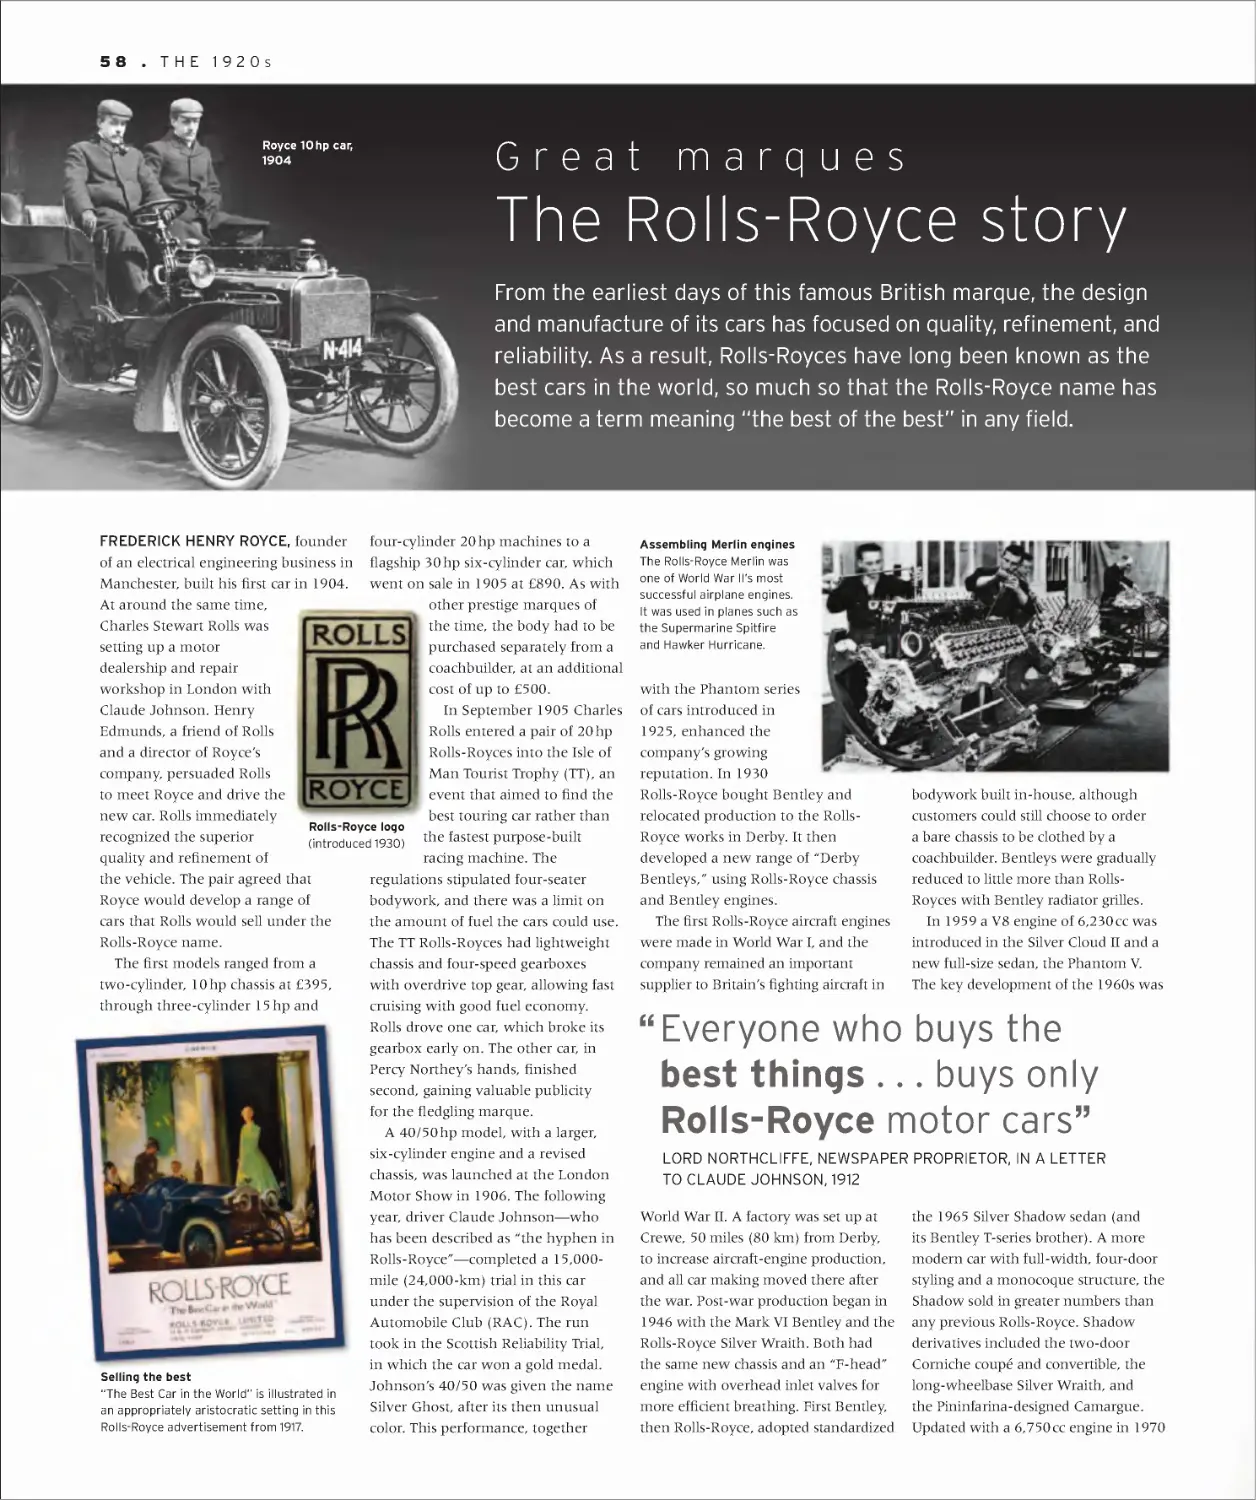 Great marques: The Rolls-Royce story 58